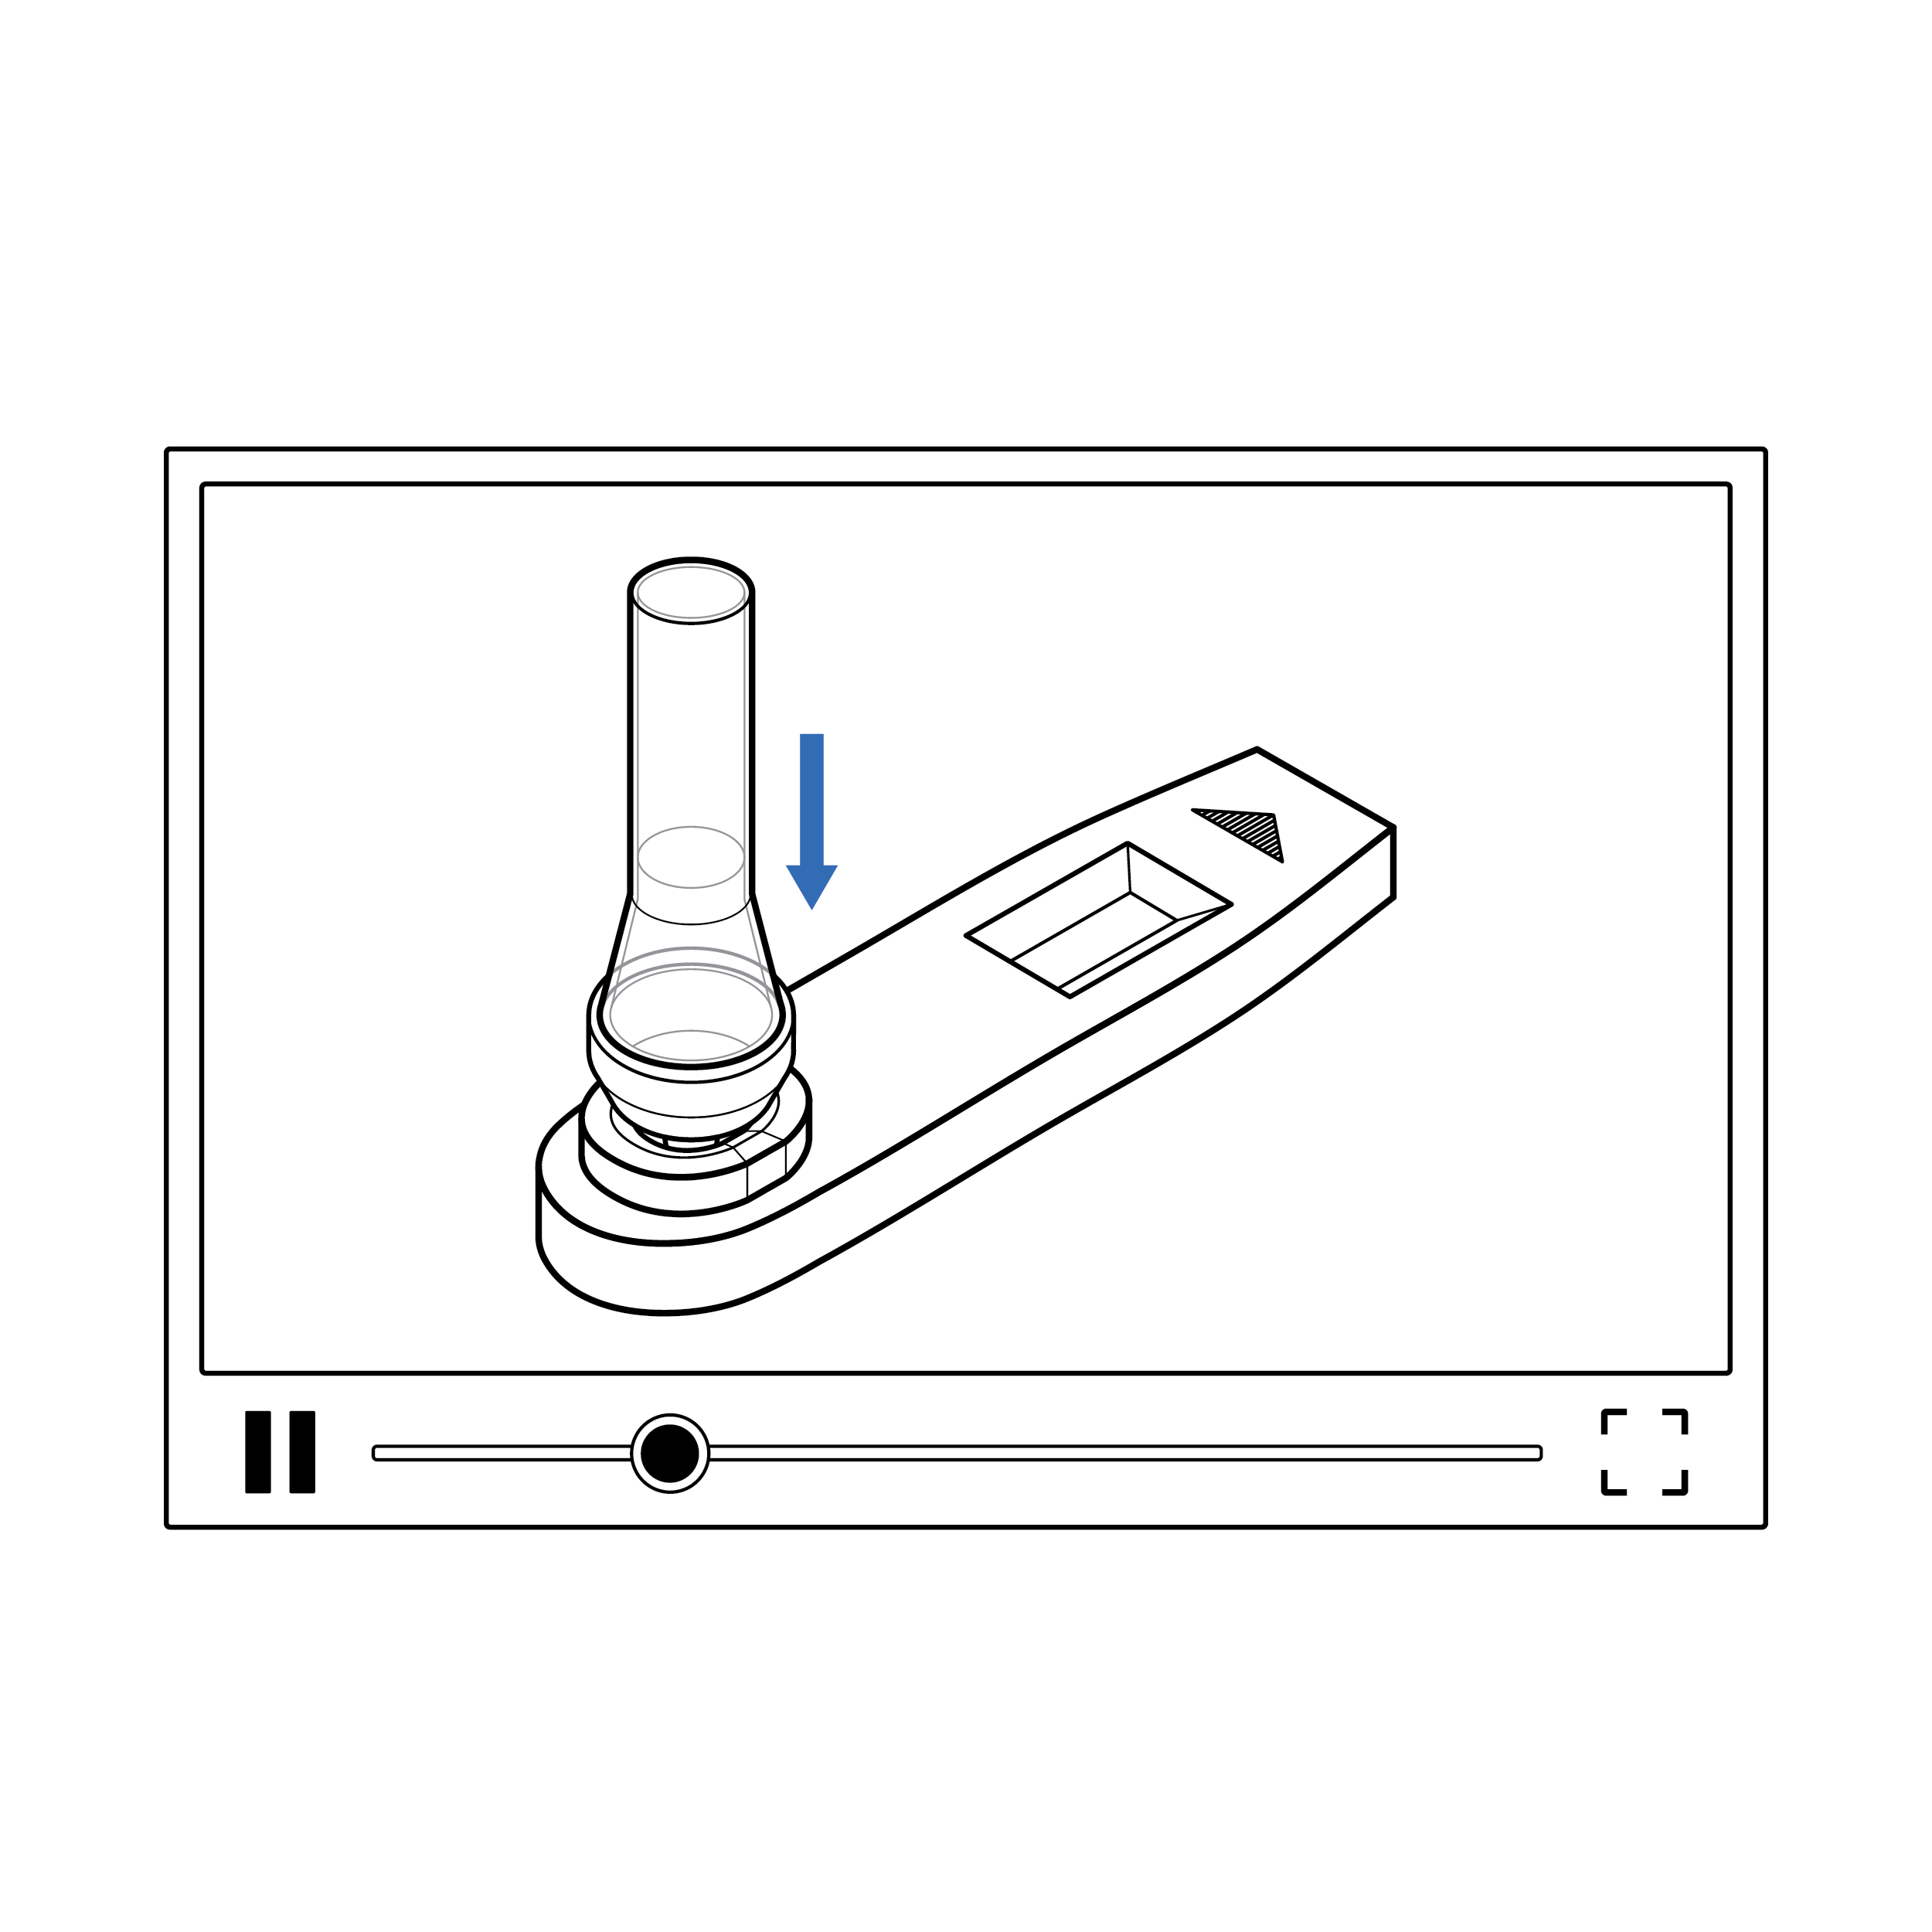 Video screen showing a vial docking to a cassette.